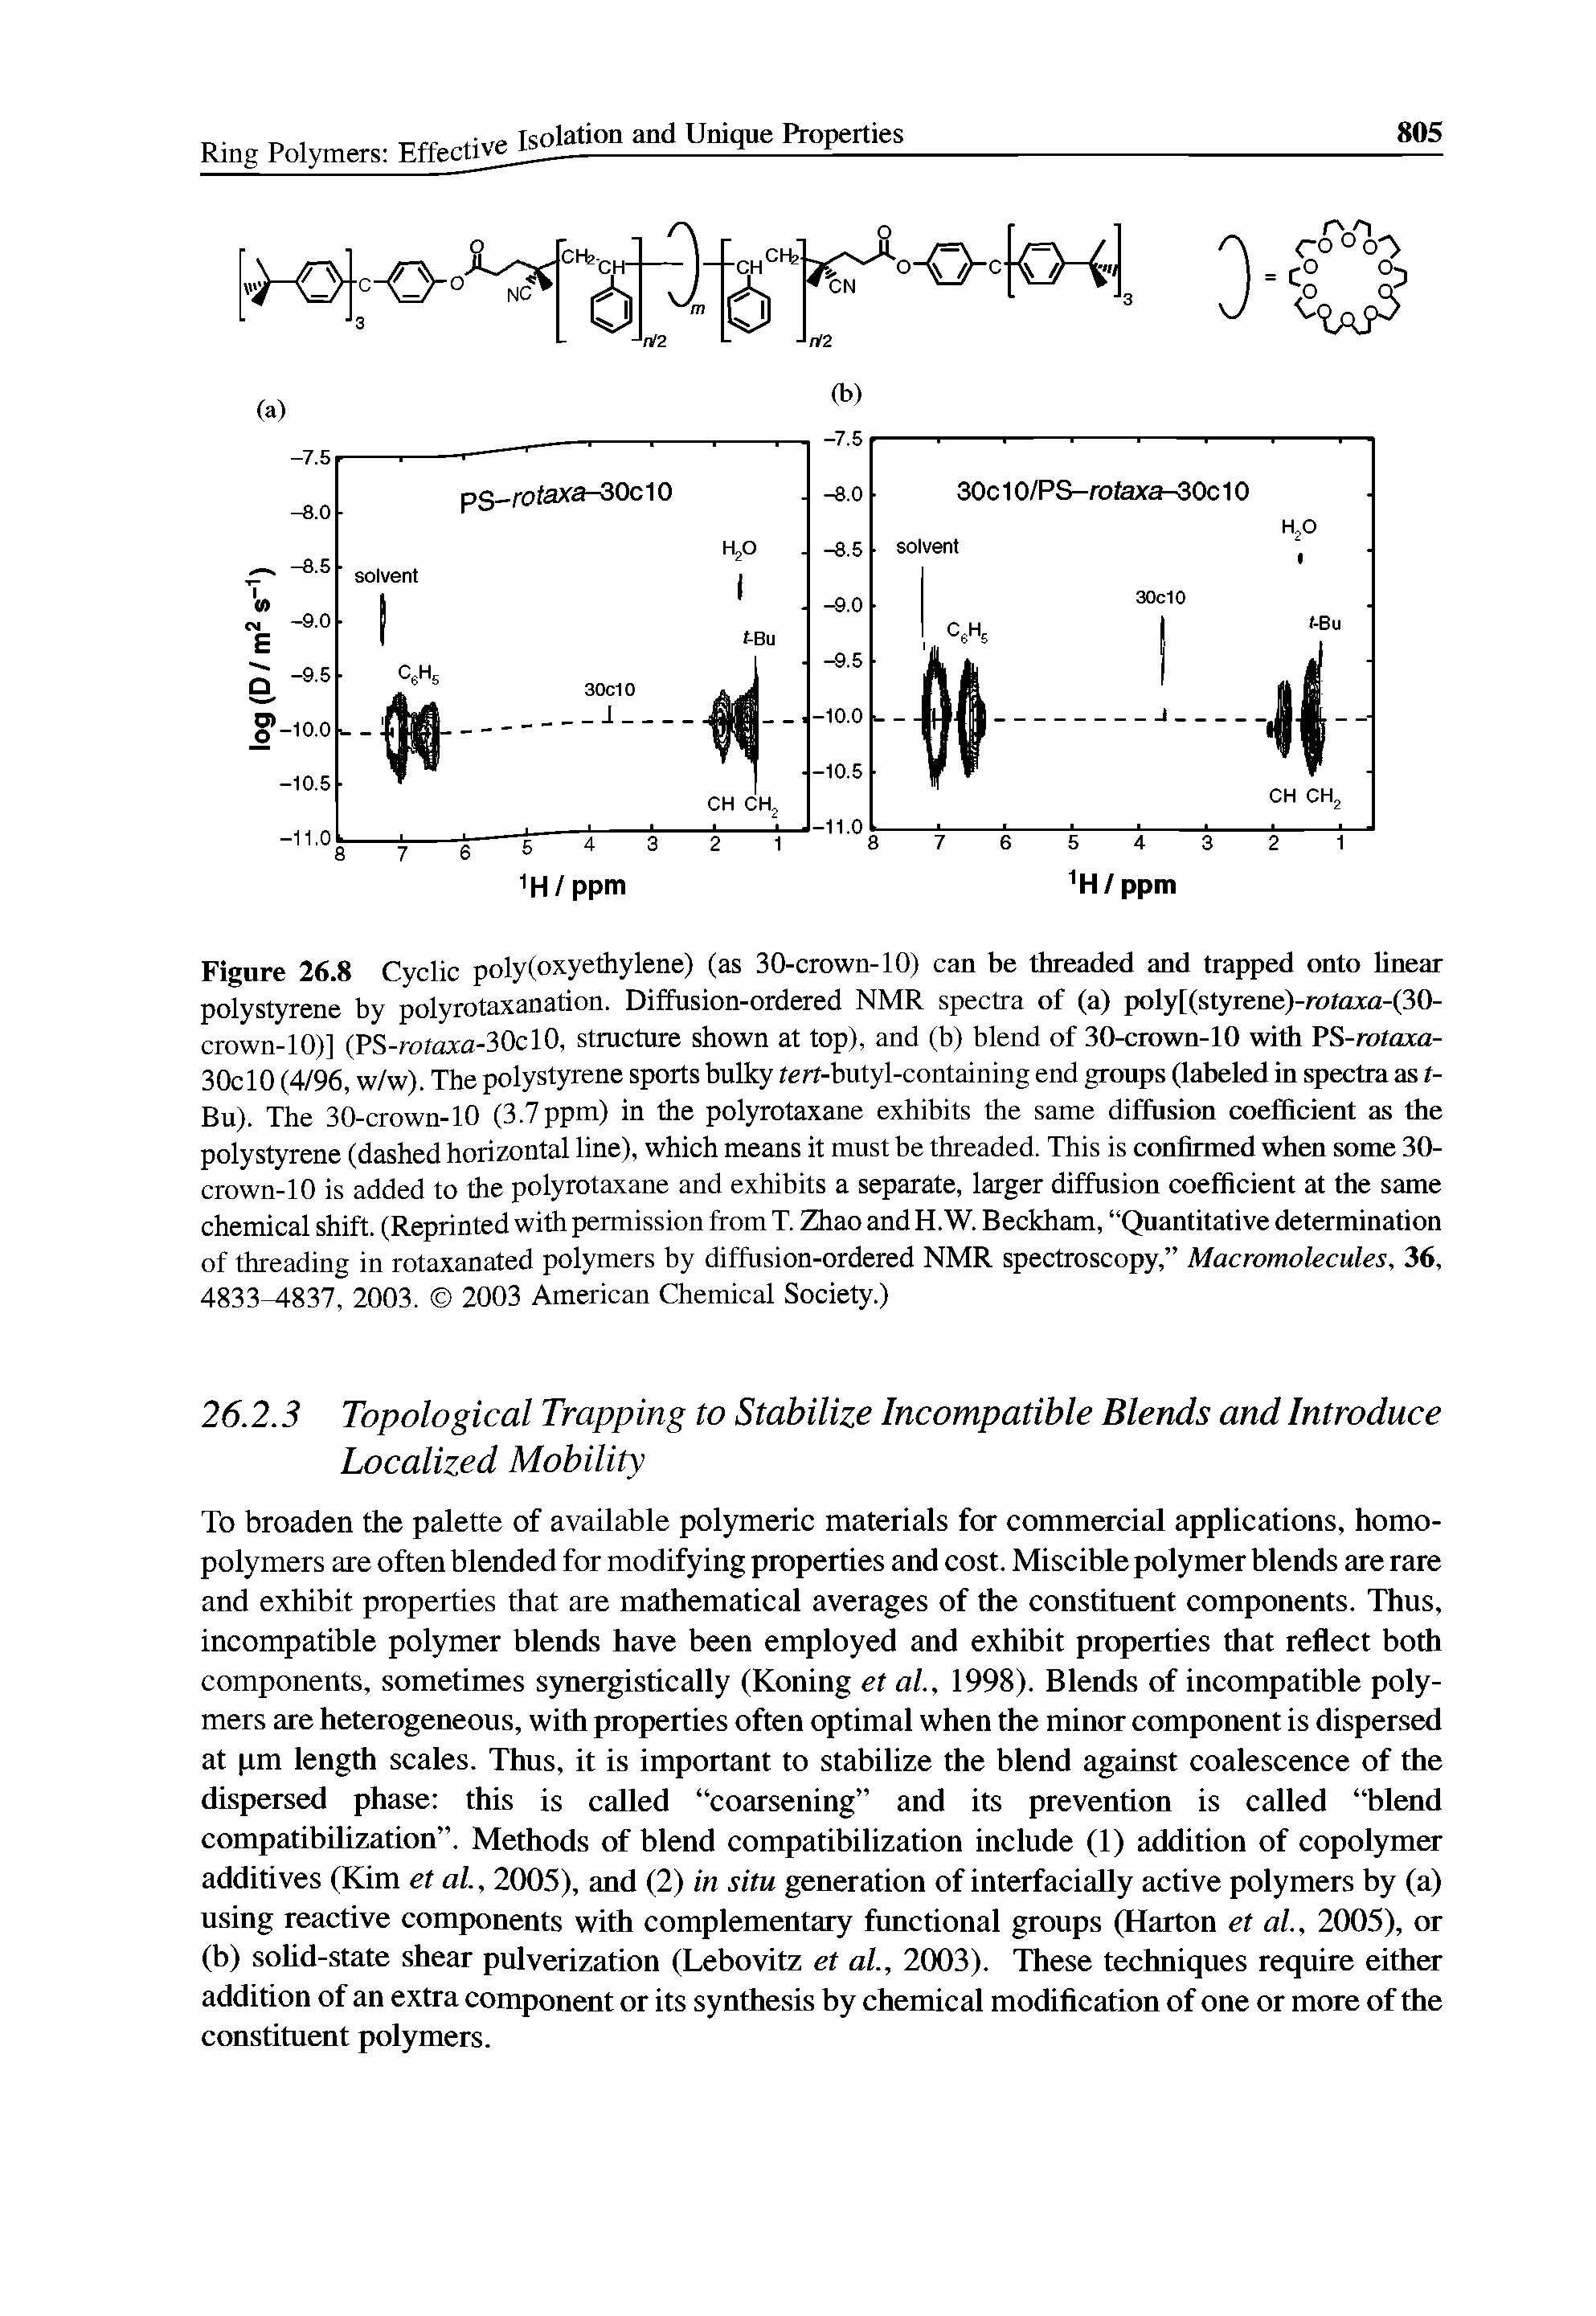 Figure 26 8 Cyclic poly(oxyethylene) (as 30-crown-10) can be threaded and trapped onto linear polystyrene by polyrotaxanation. Diffusion-ordered NMR spectra of (a) poly[(styrene)-/o/flia-(30-crown-10)] (PS-roroxfl-30cl0, structure shown at top), and (b) blend of 30-crown-lO with PS-zo/oia-30c 10 (4/96, w/w) The polystyrene sports bulky ferf-butyl-containing end groups (labeled in spectra as t-Bu). The 30-crown-10 (3.7 ppm) in the polyrotaxane exhibits the same diffusion coefficient as the polystyrene (dashed horizontal line), which means it must be threaded. This is confirmed when some 30-crown-10 is added to the polyrotaxane and exhibits a separate, larger diffusion coefficient at the same chemical shift. (Reprinted with permission from T. Zhao and H.W. Beckham, Quantitative determination of threading in rotaxanated polymers by diffusion-ordered NMR spectroscopy, Macromolecules, 36, 4833 837, 2003. 2003 American Chemical Society.)...